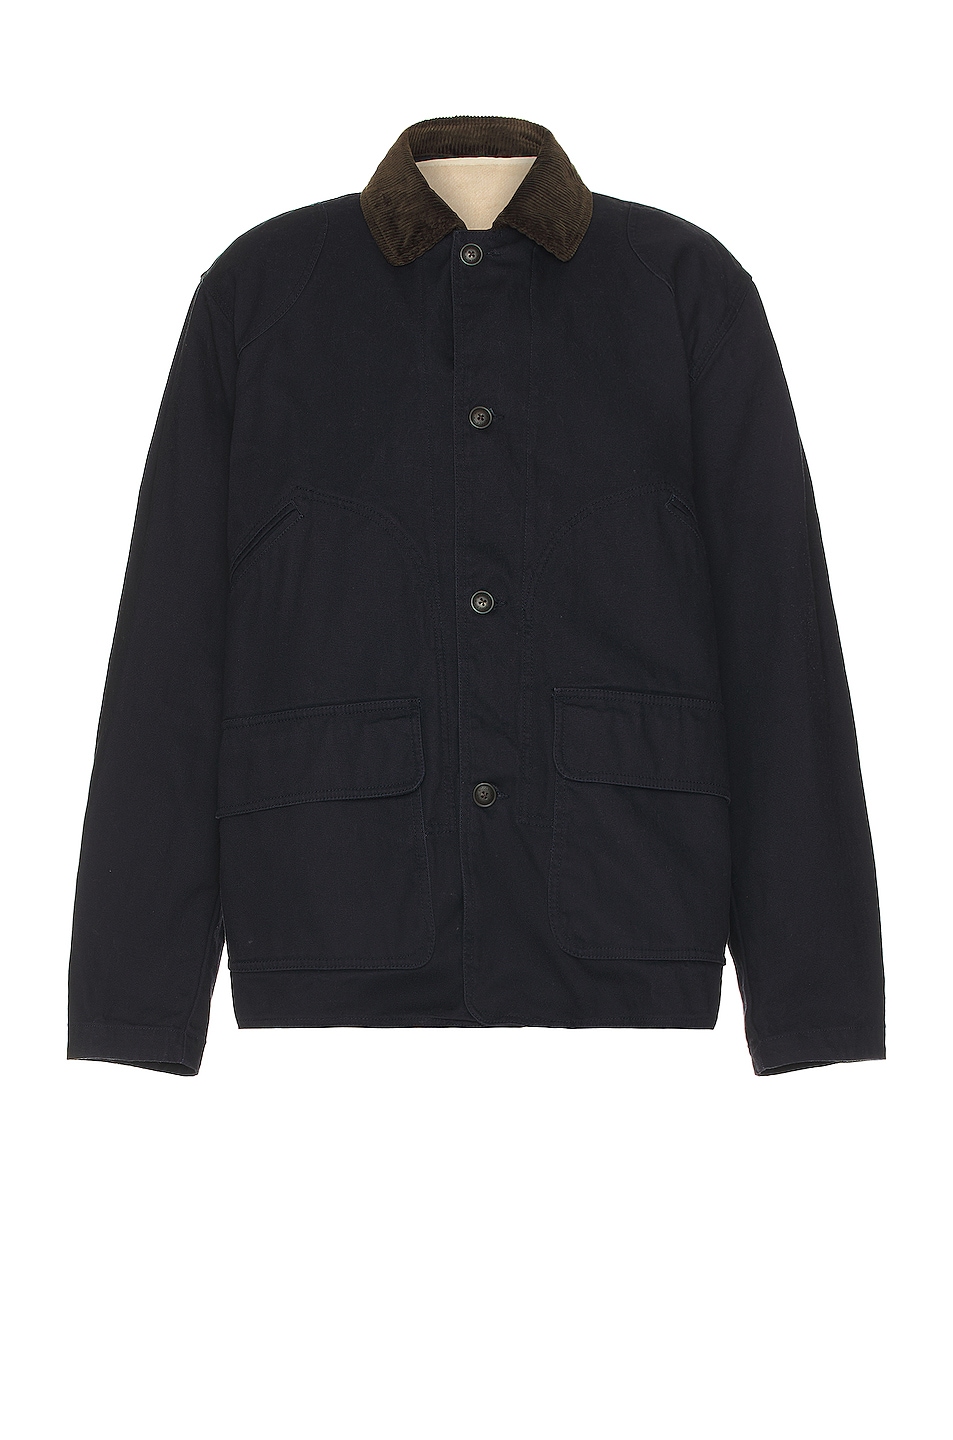 Image 1 of ONE OF THESE DAYS x Woolrich 3 IN 1 Jacket in Navy & Brown